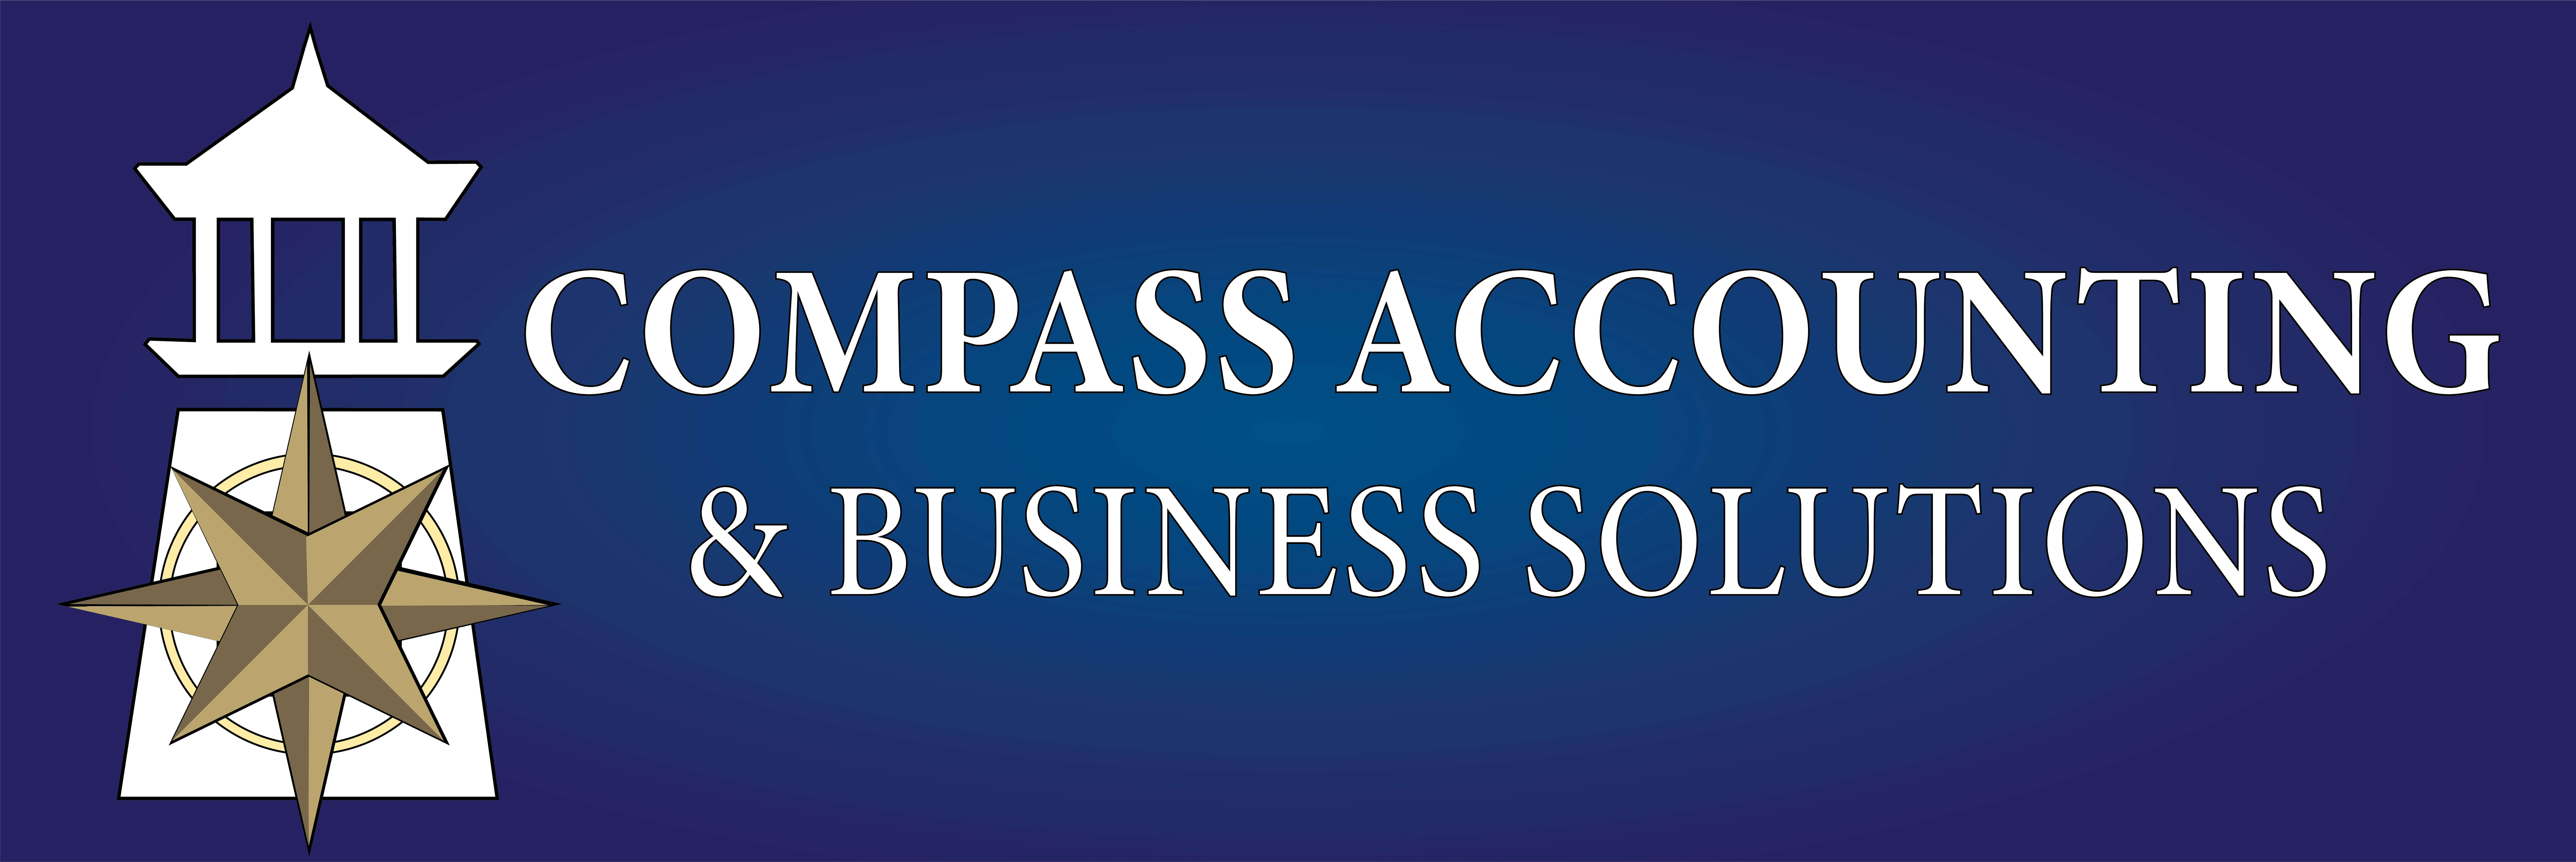 Compass Accounting & Business Solutions Logo